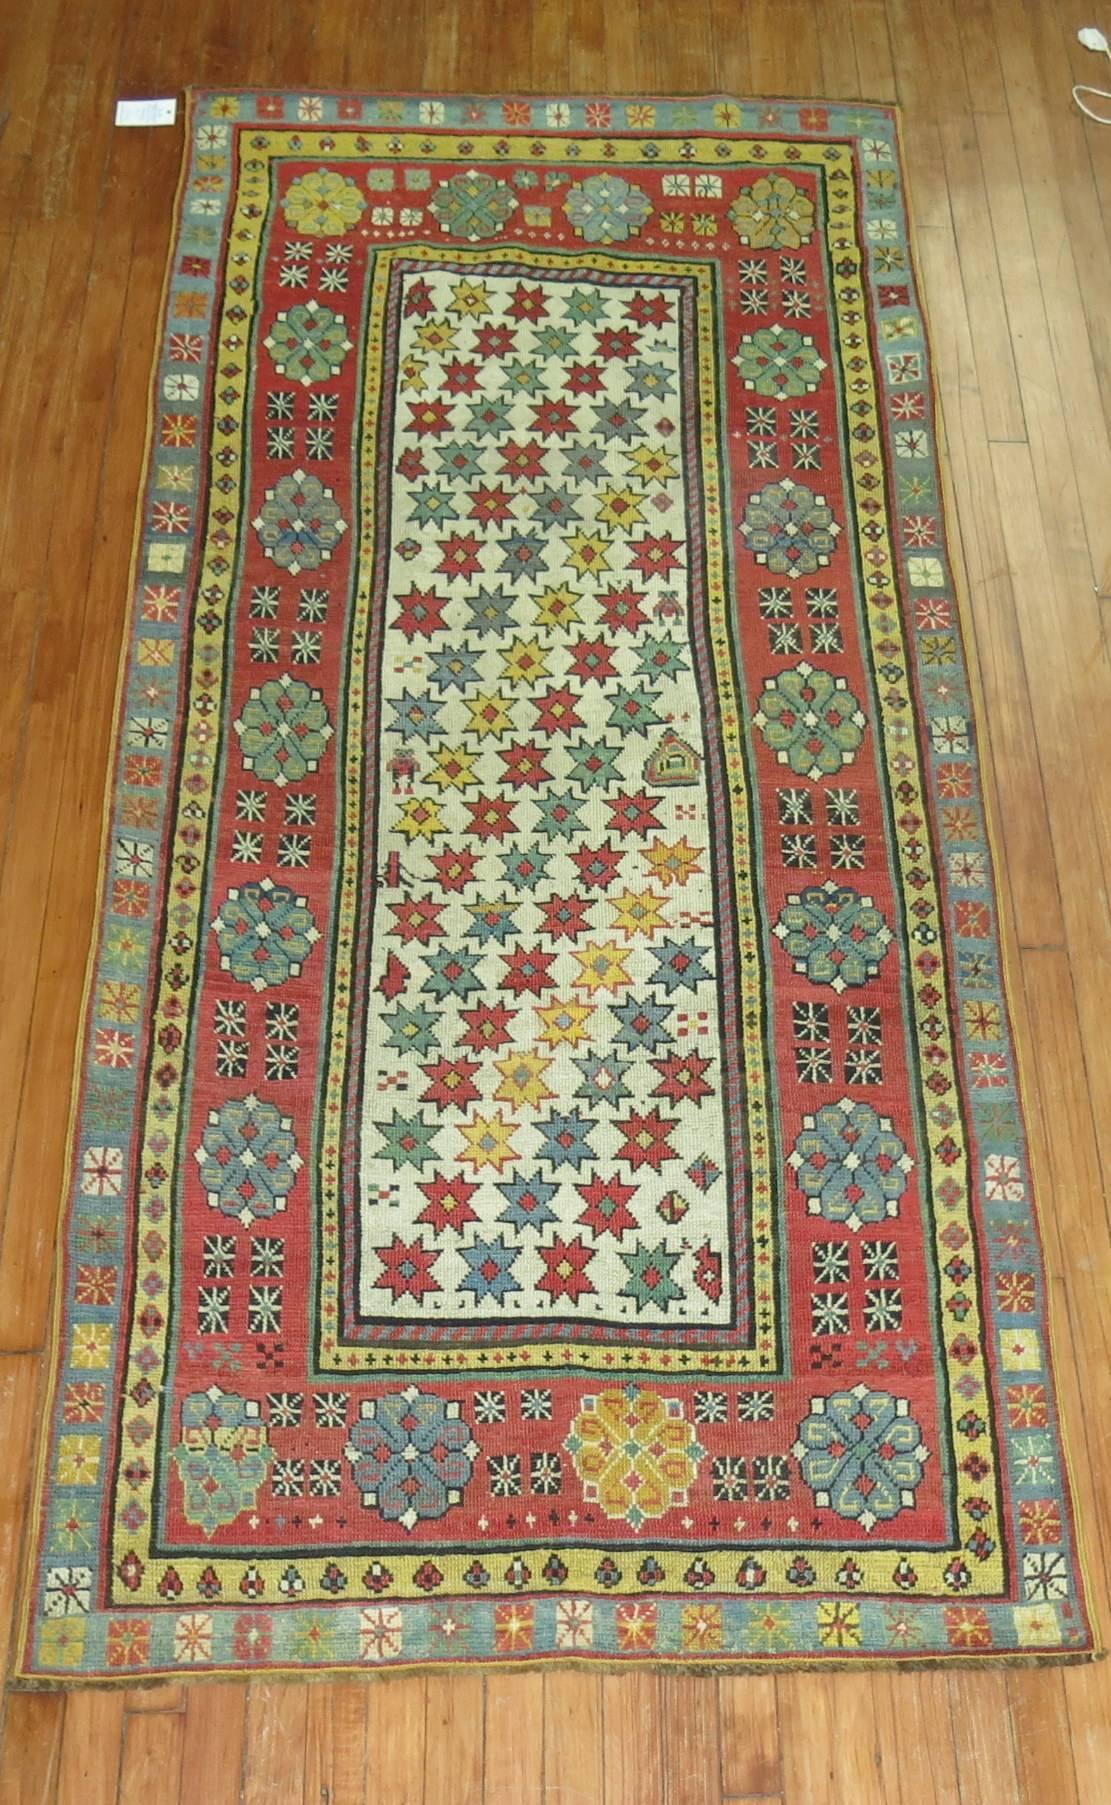 Colorful antique Caucasian Talish intermediate size runner. Small Star crossed all over design on an ivory ground, accents in soft red, coral, mustard and teal.

Measures: 3'8